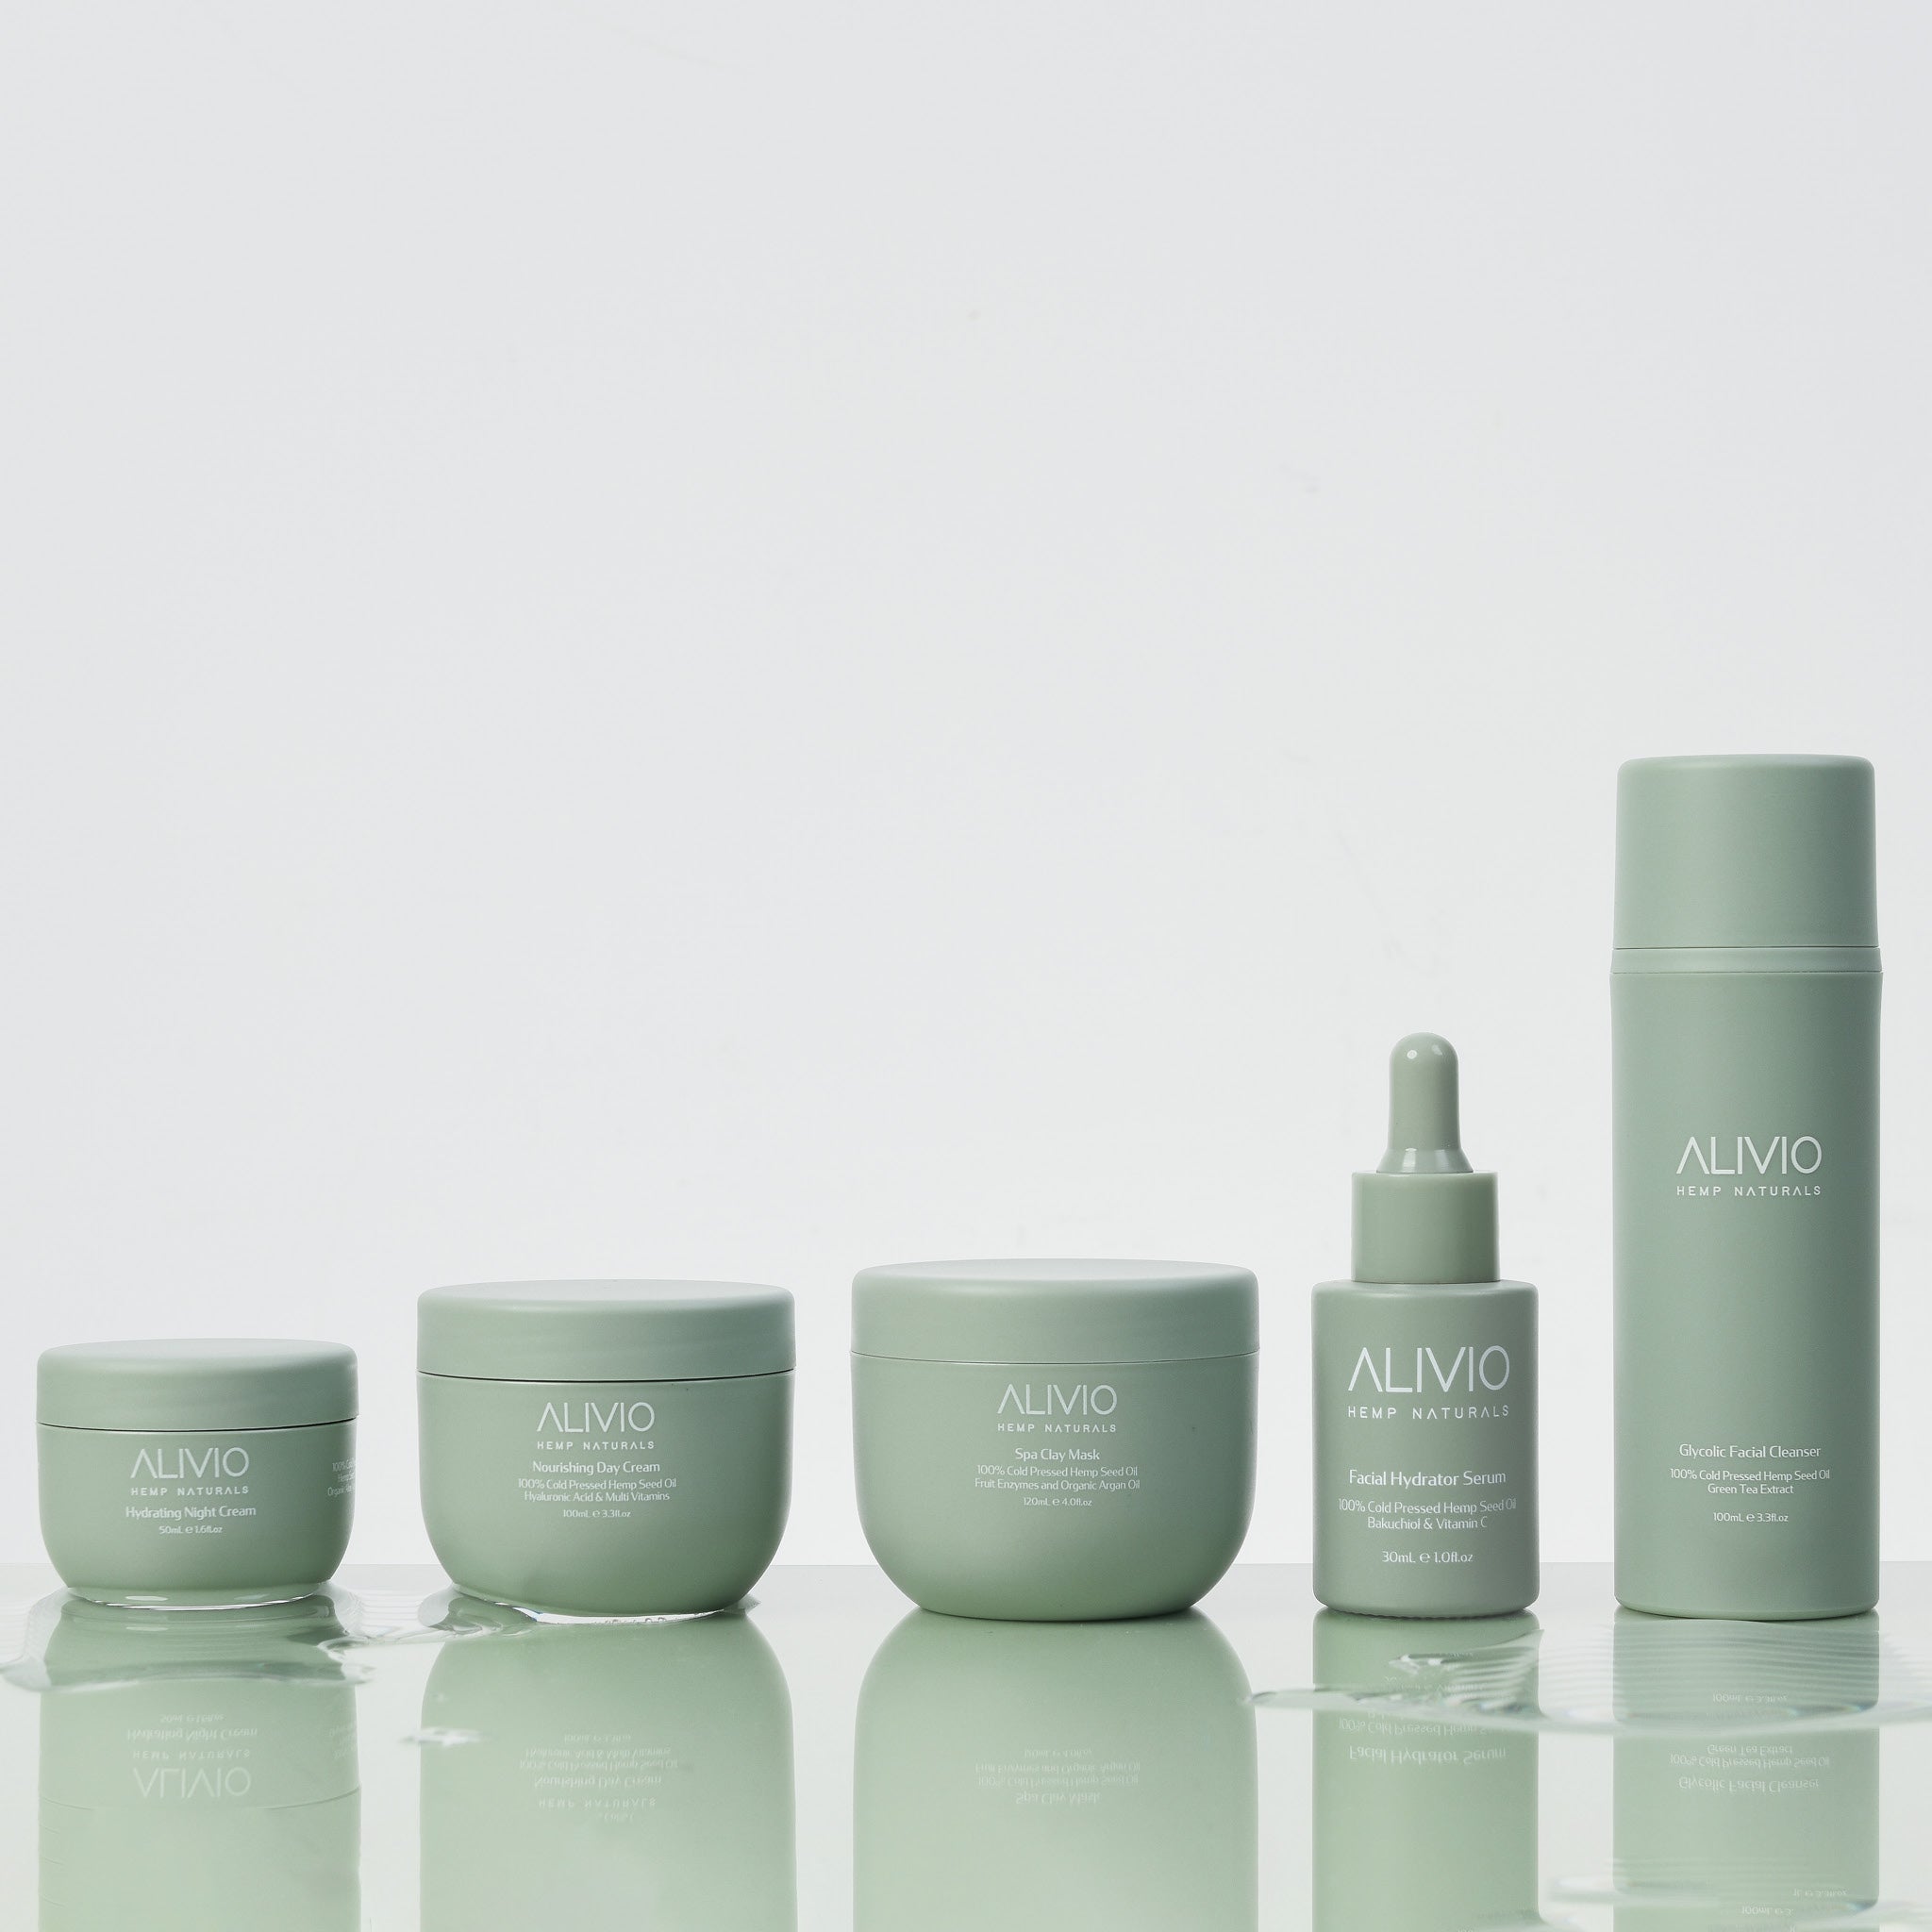 Alivio Wellness Complete Wellness Bundle: a comprehensive skincare routine featuring  Glycolic Face Wash for gentle exfoliation, Facial Hydrator Serum for hydration and protection, Nourishing Day Cream for daily hydration and protection, Hydrating Night Cream for deep overnight nourishment, and Clay Mask for deep cleansing and purification.